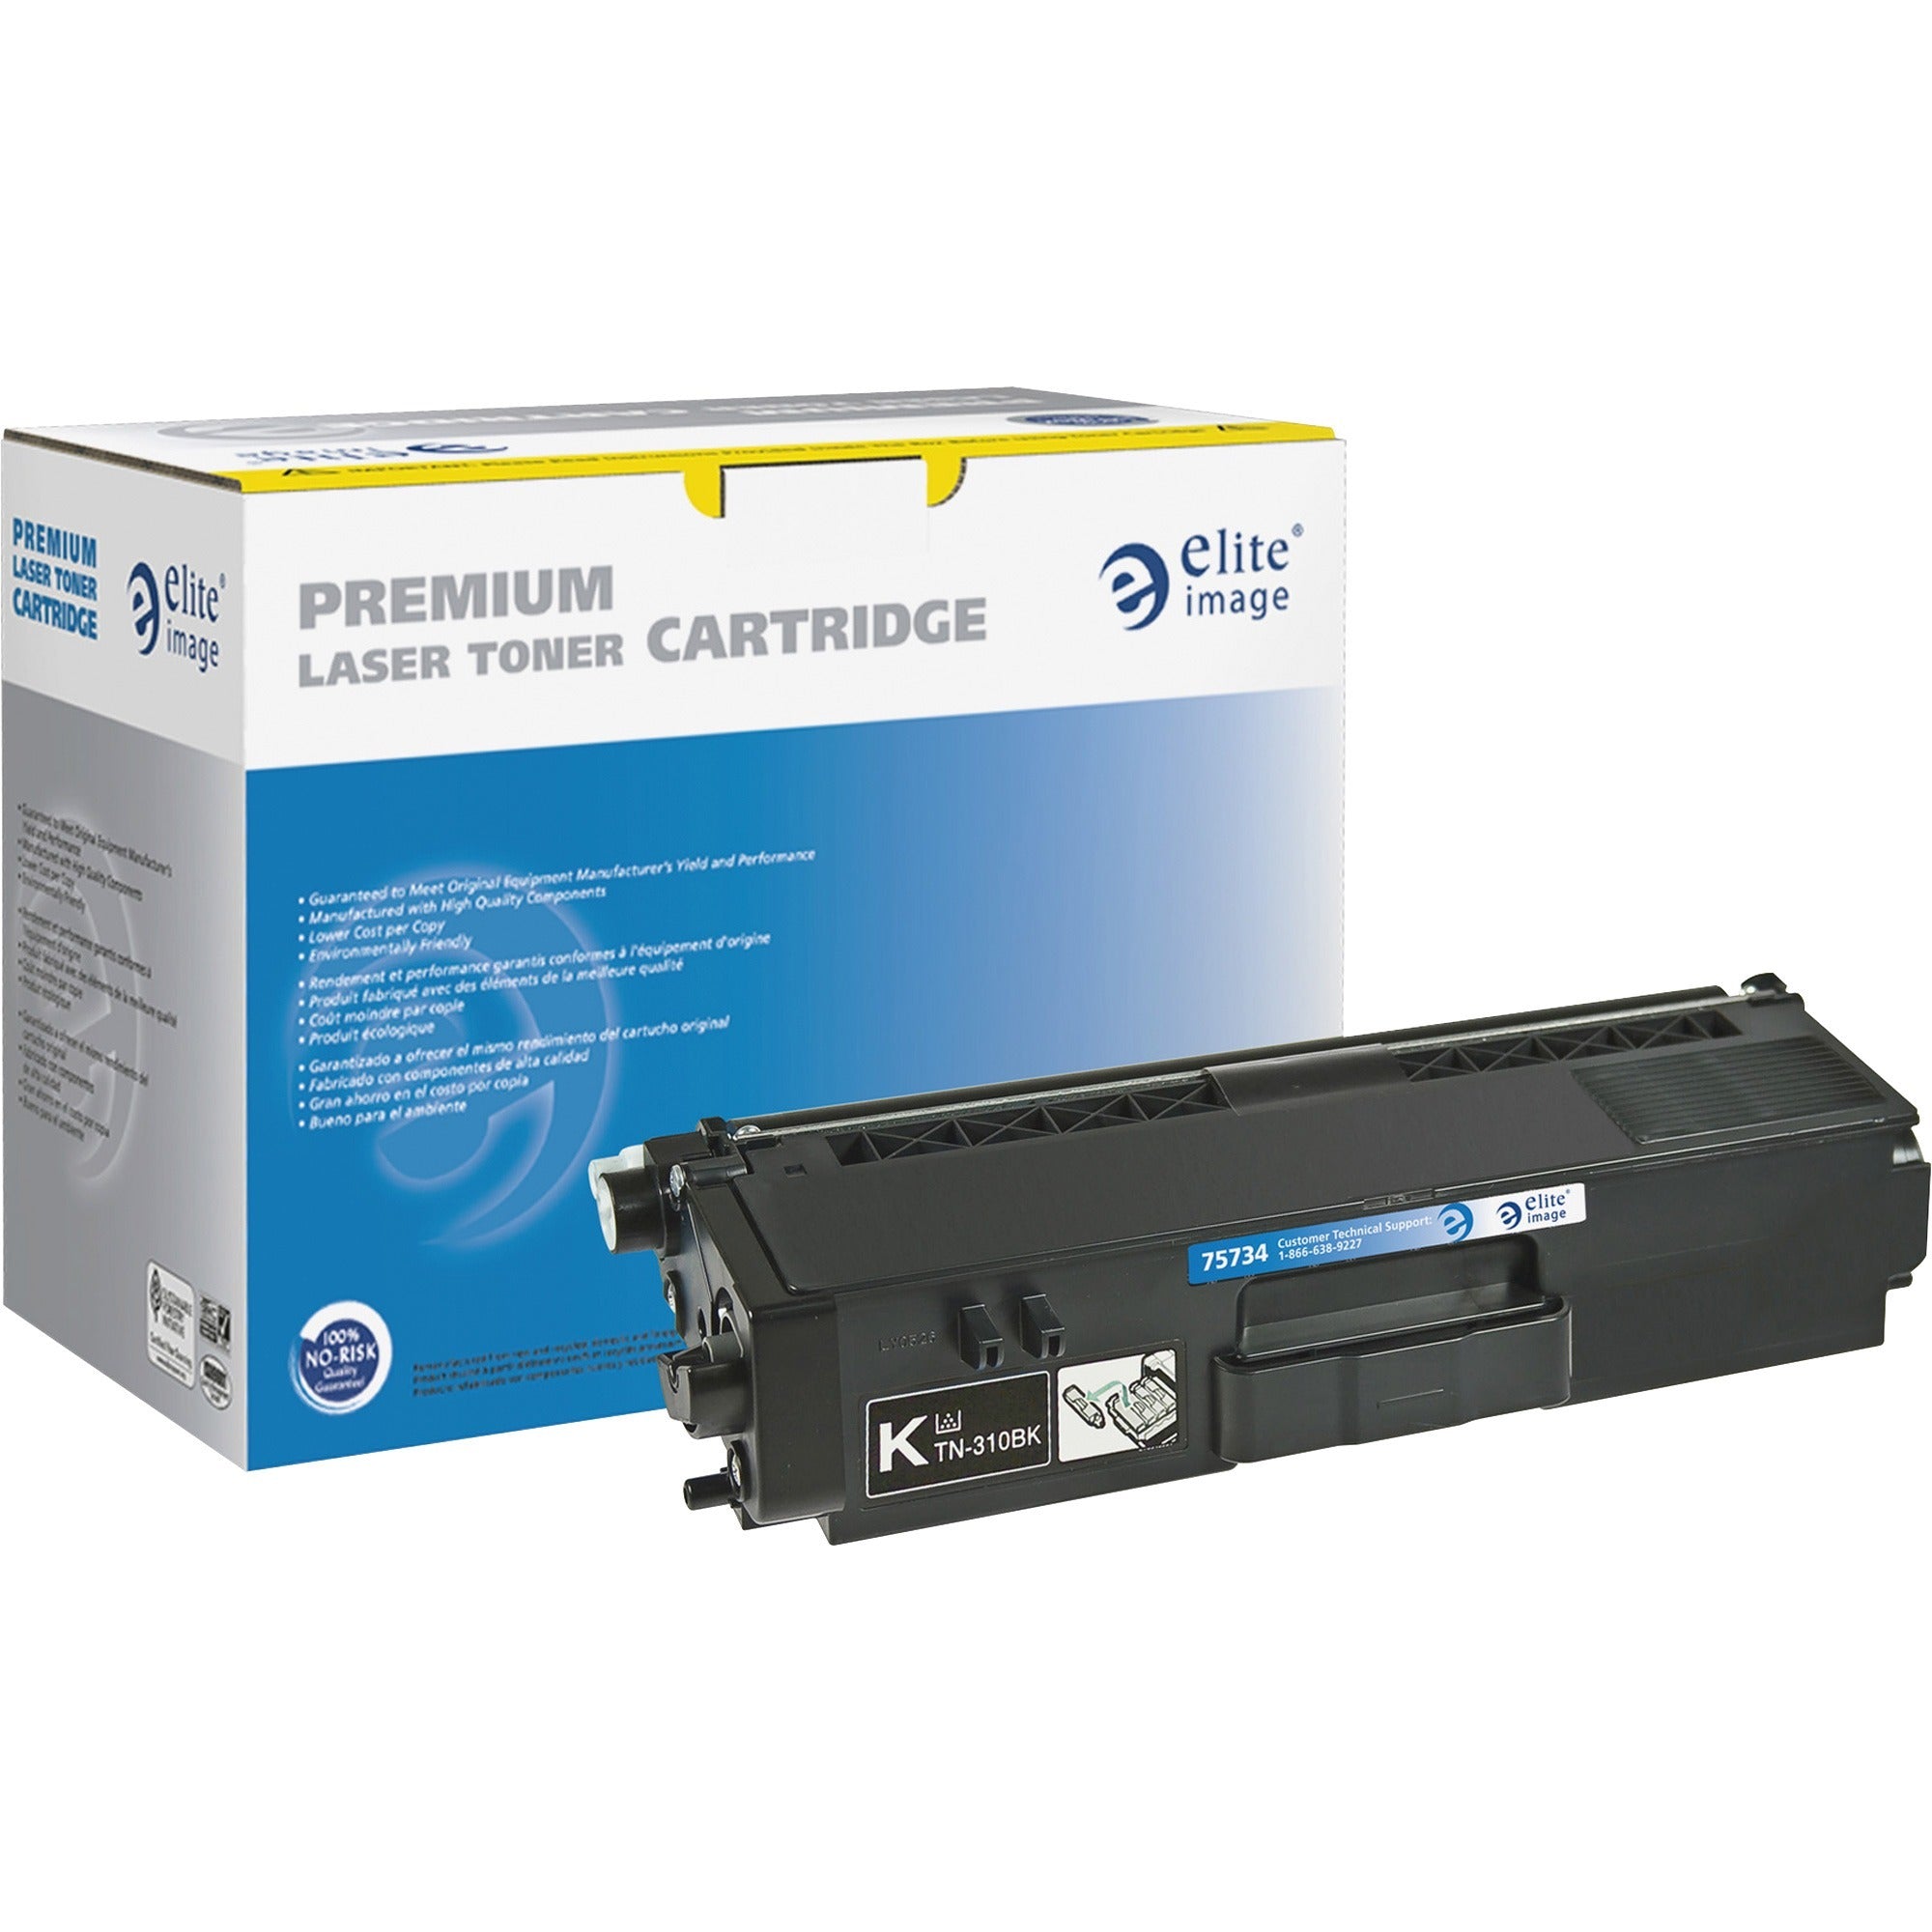 Elite Image Remanufactured High Yield Laser Toner Cartridge - Alternative for Brother TN315 - Black - 1 Each - 6000 Pages - 1